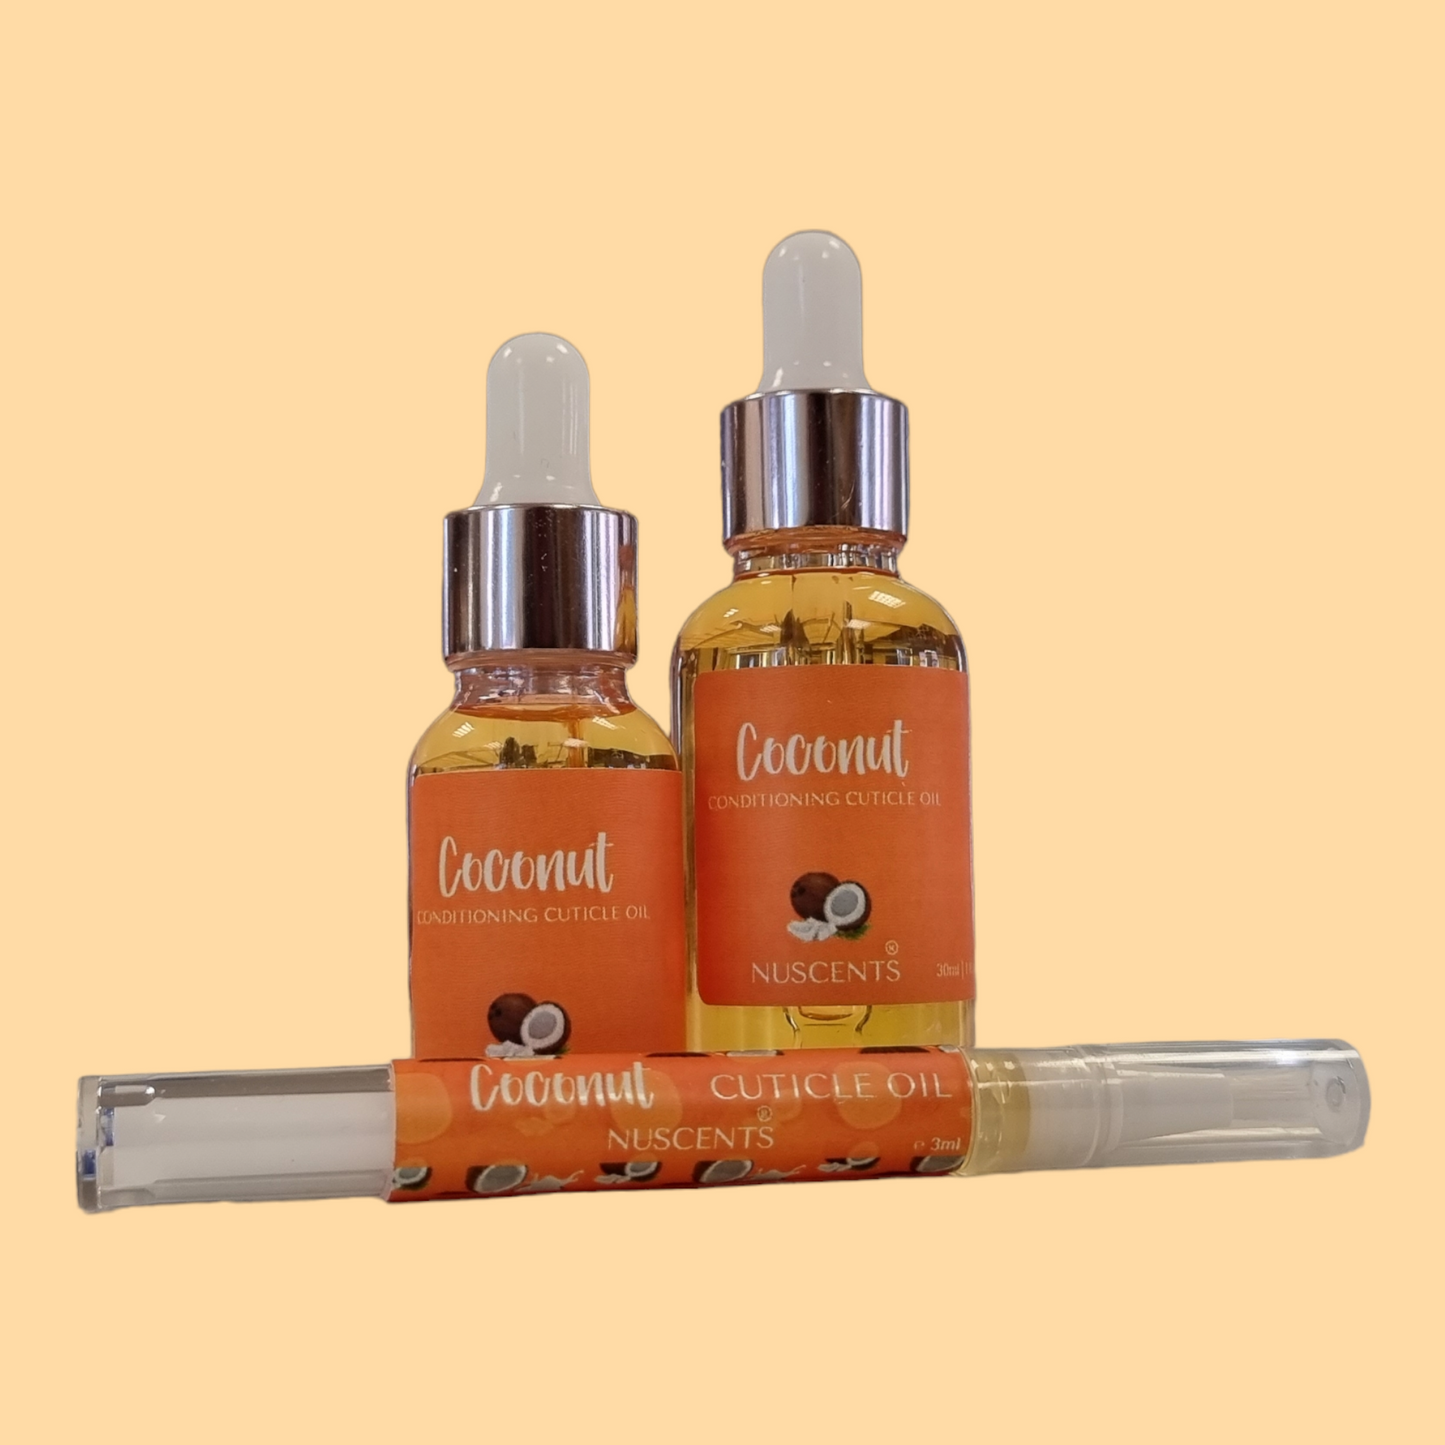 LAST CHANCE Conditioning Cuticle Oil - Coconut